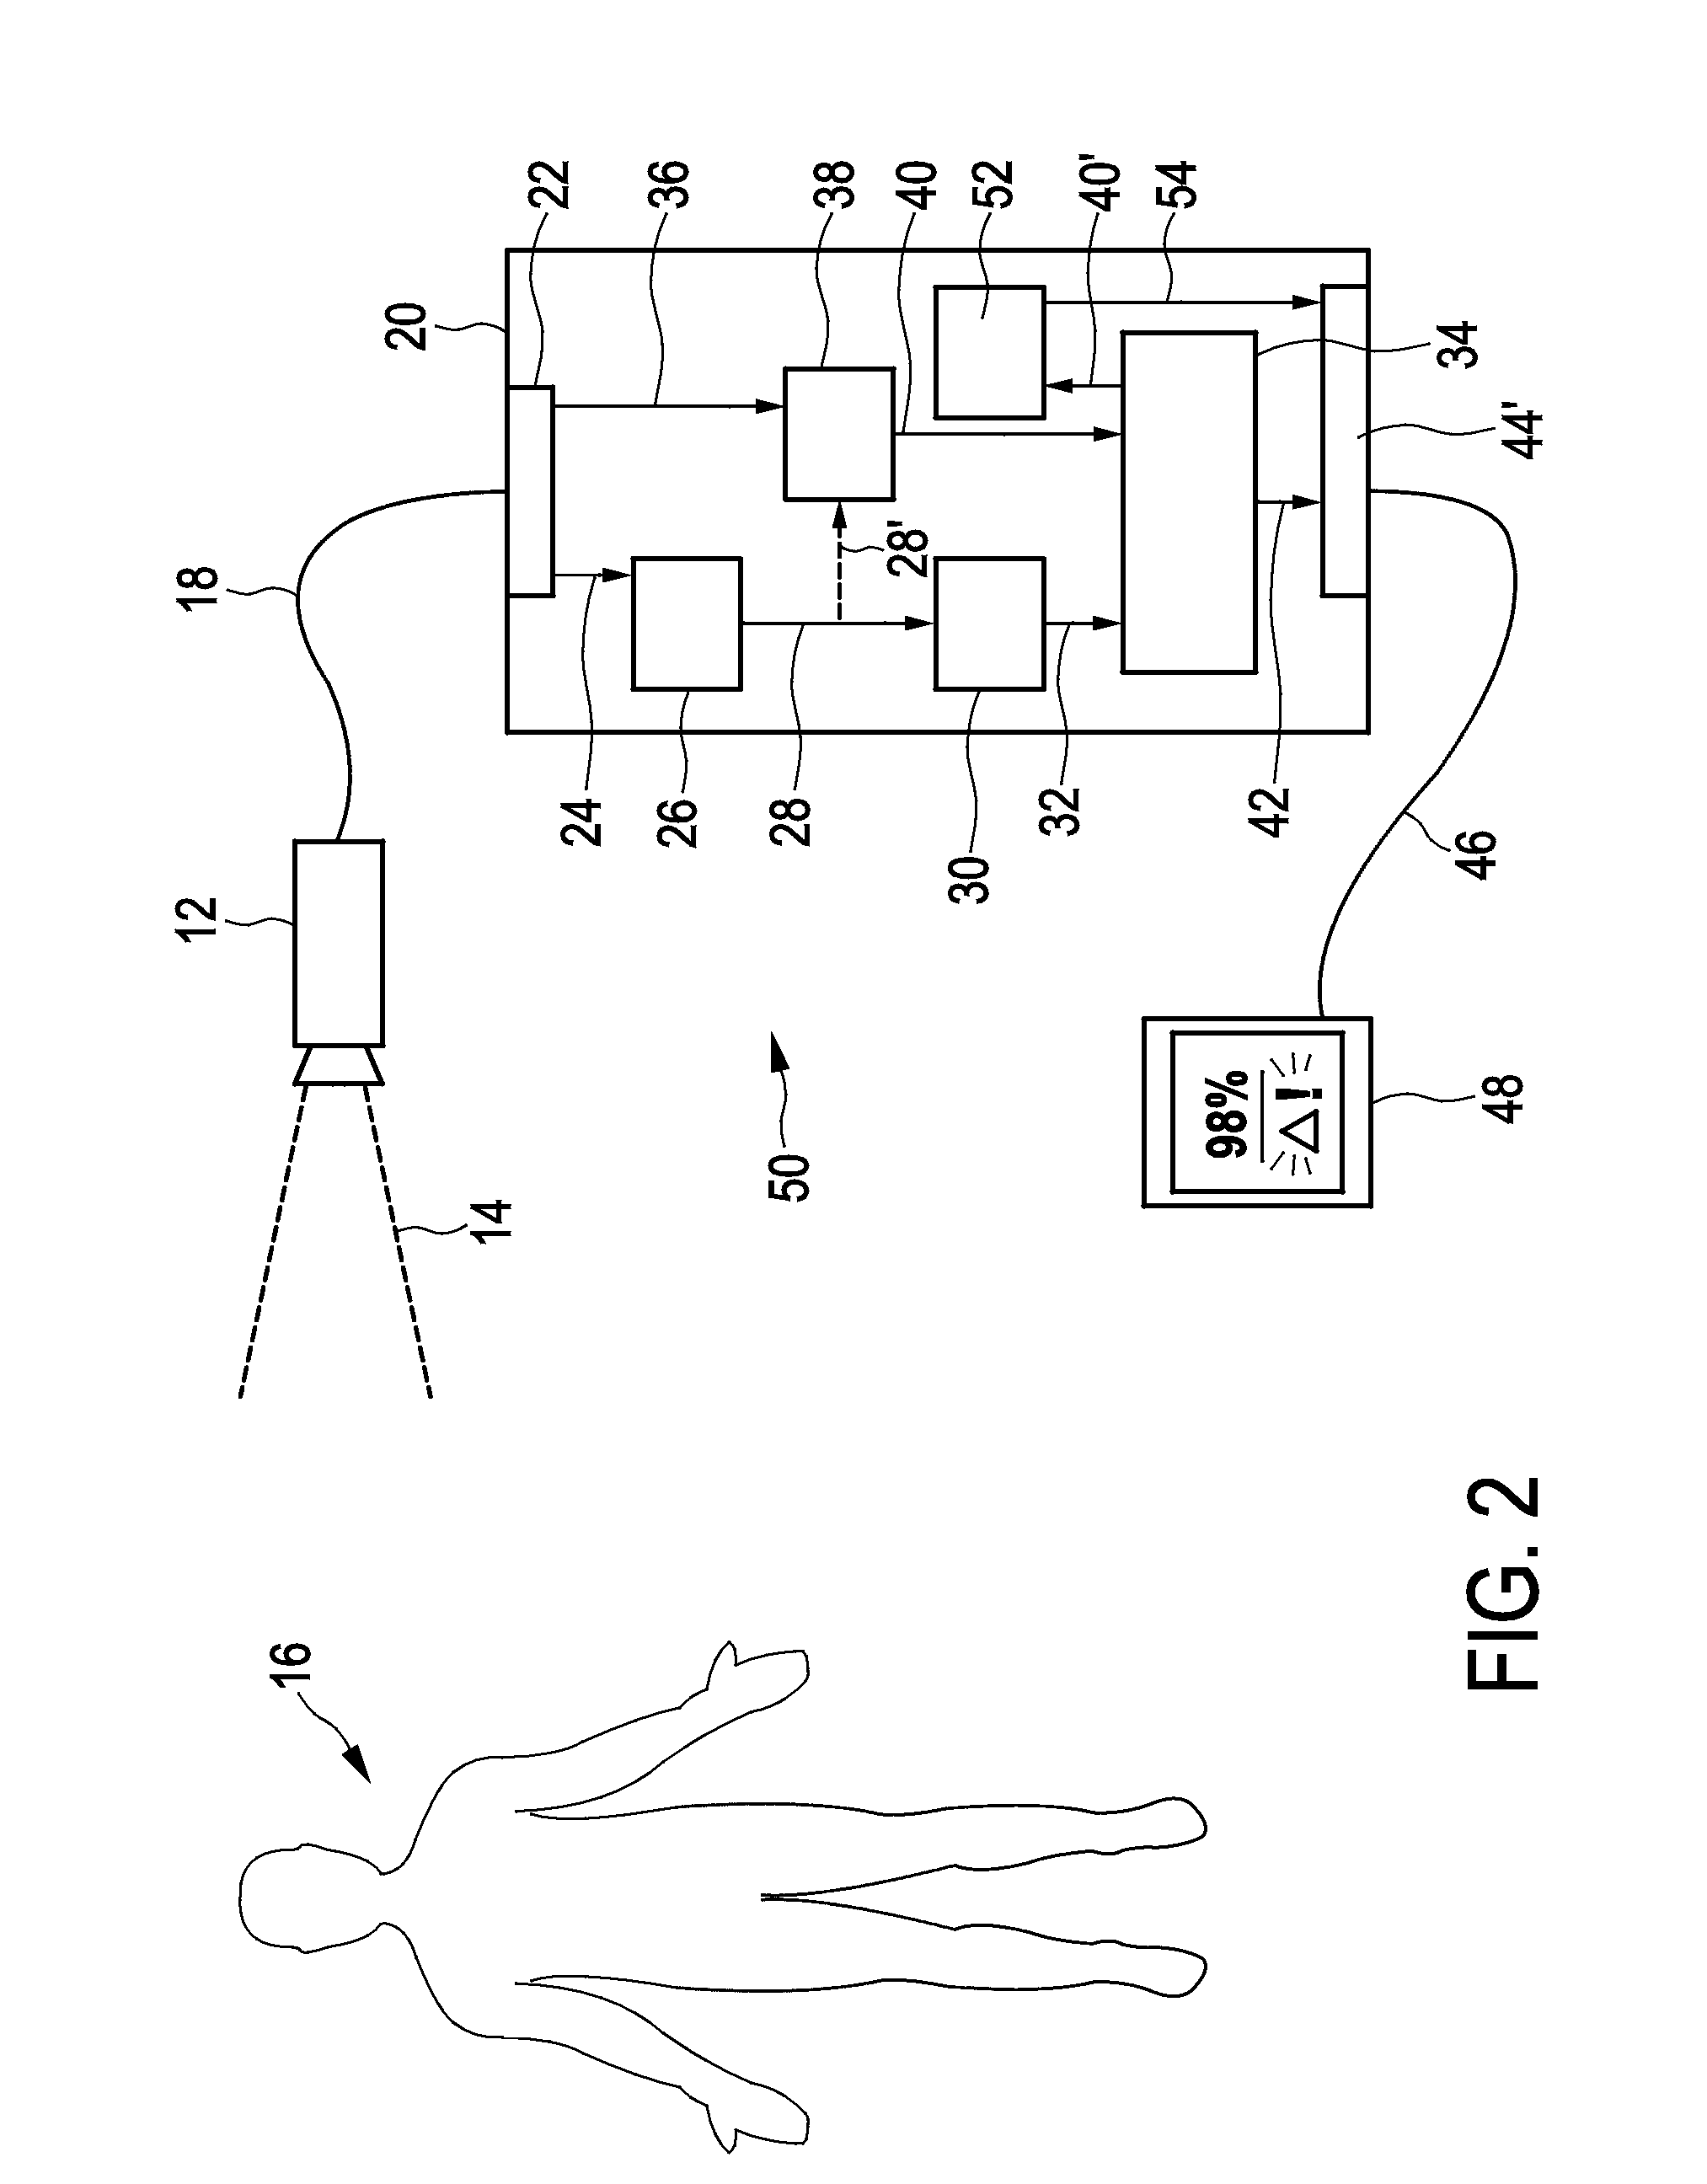 Device and method for obtaining and processing measurement readings of a living being